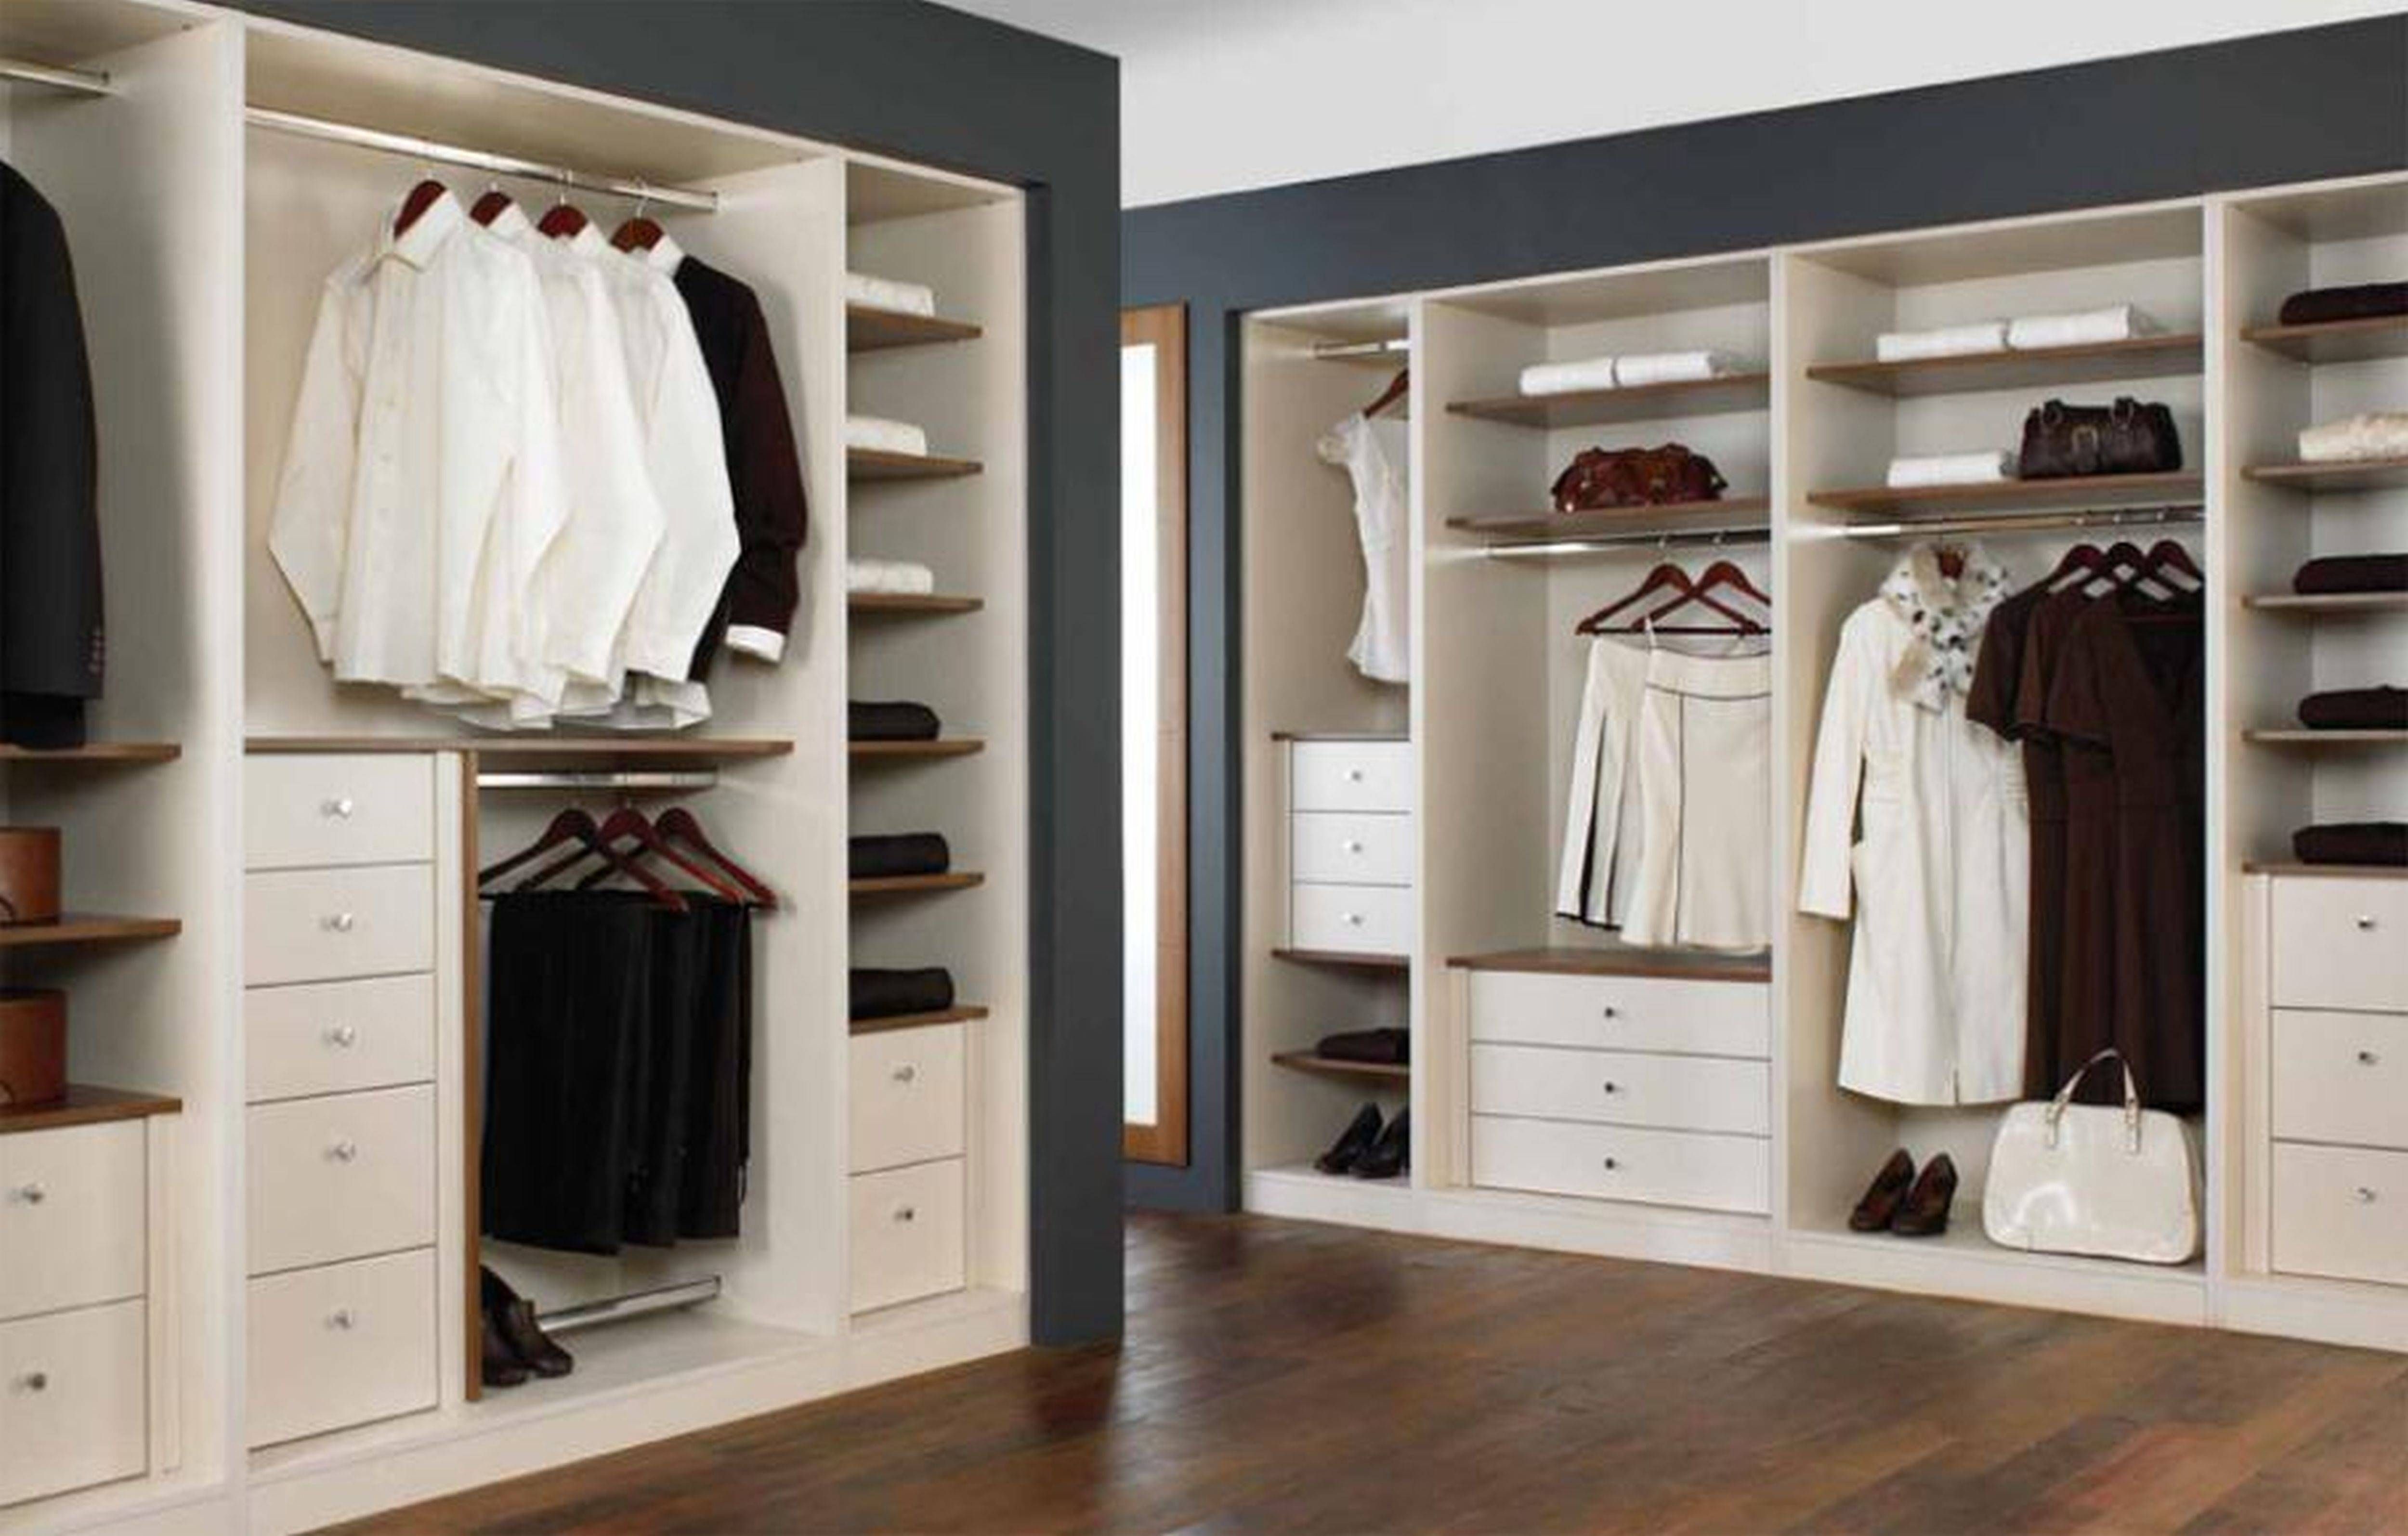 Bedroom : Awesome Small Bedroom Decorating Ideas Bedroom Storage Intended For Bedroom Wardrobe Storages (View 13 of 30)